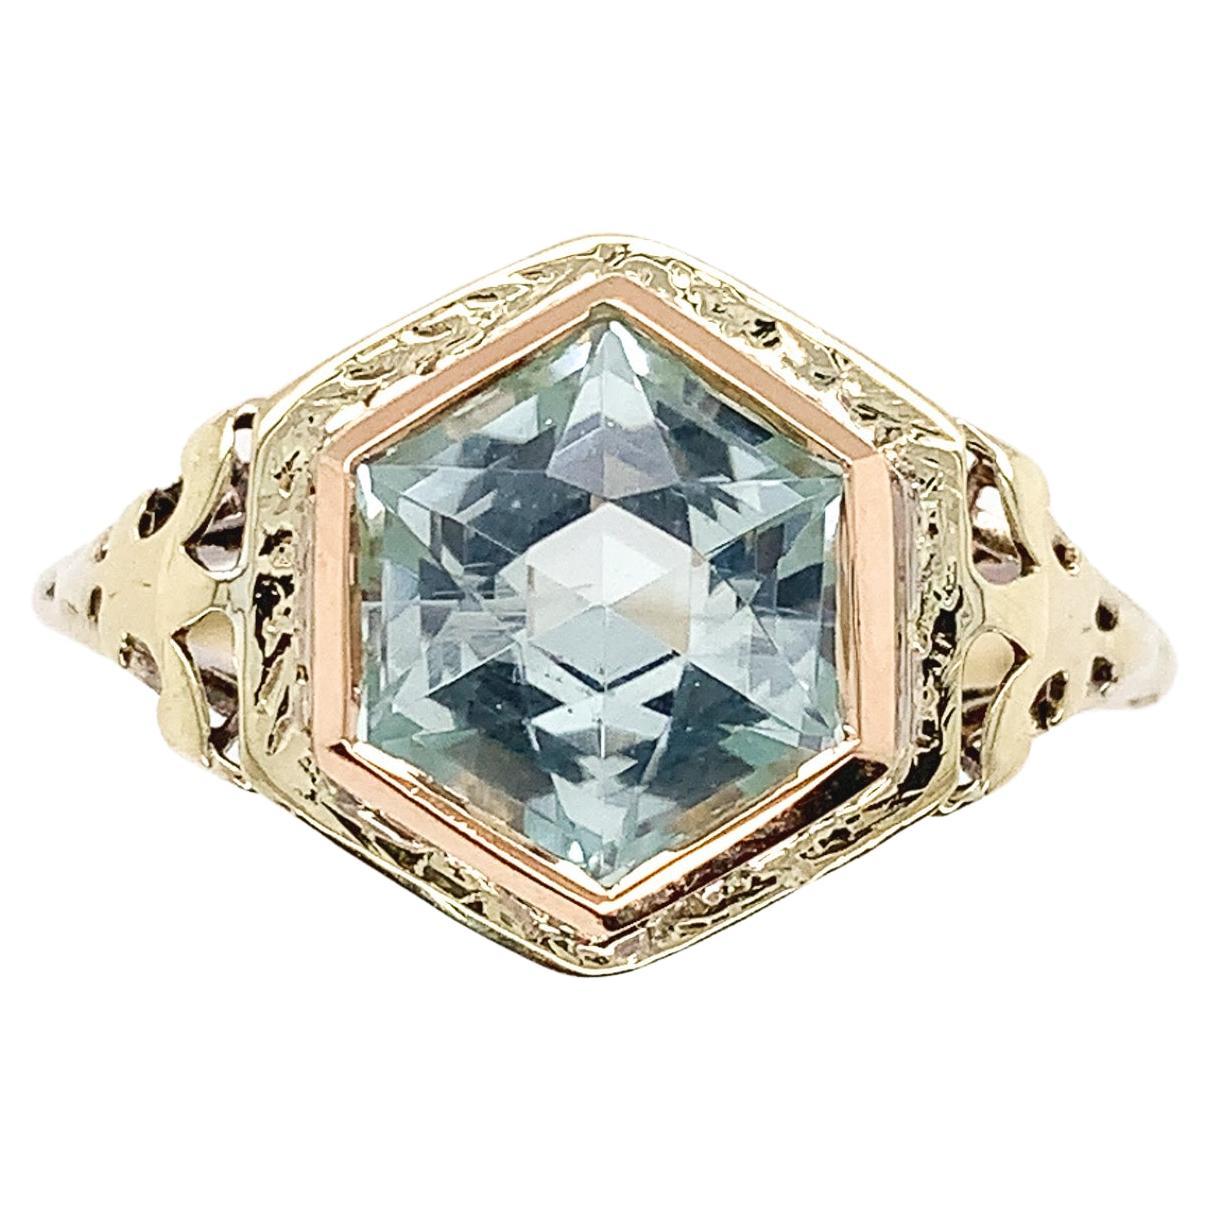 14K Yellow Gold Art Deco Filigree Ring with a Specialty Hexagon Cut Aquamarine